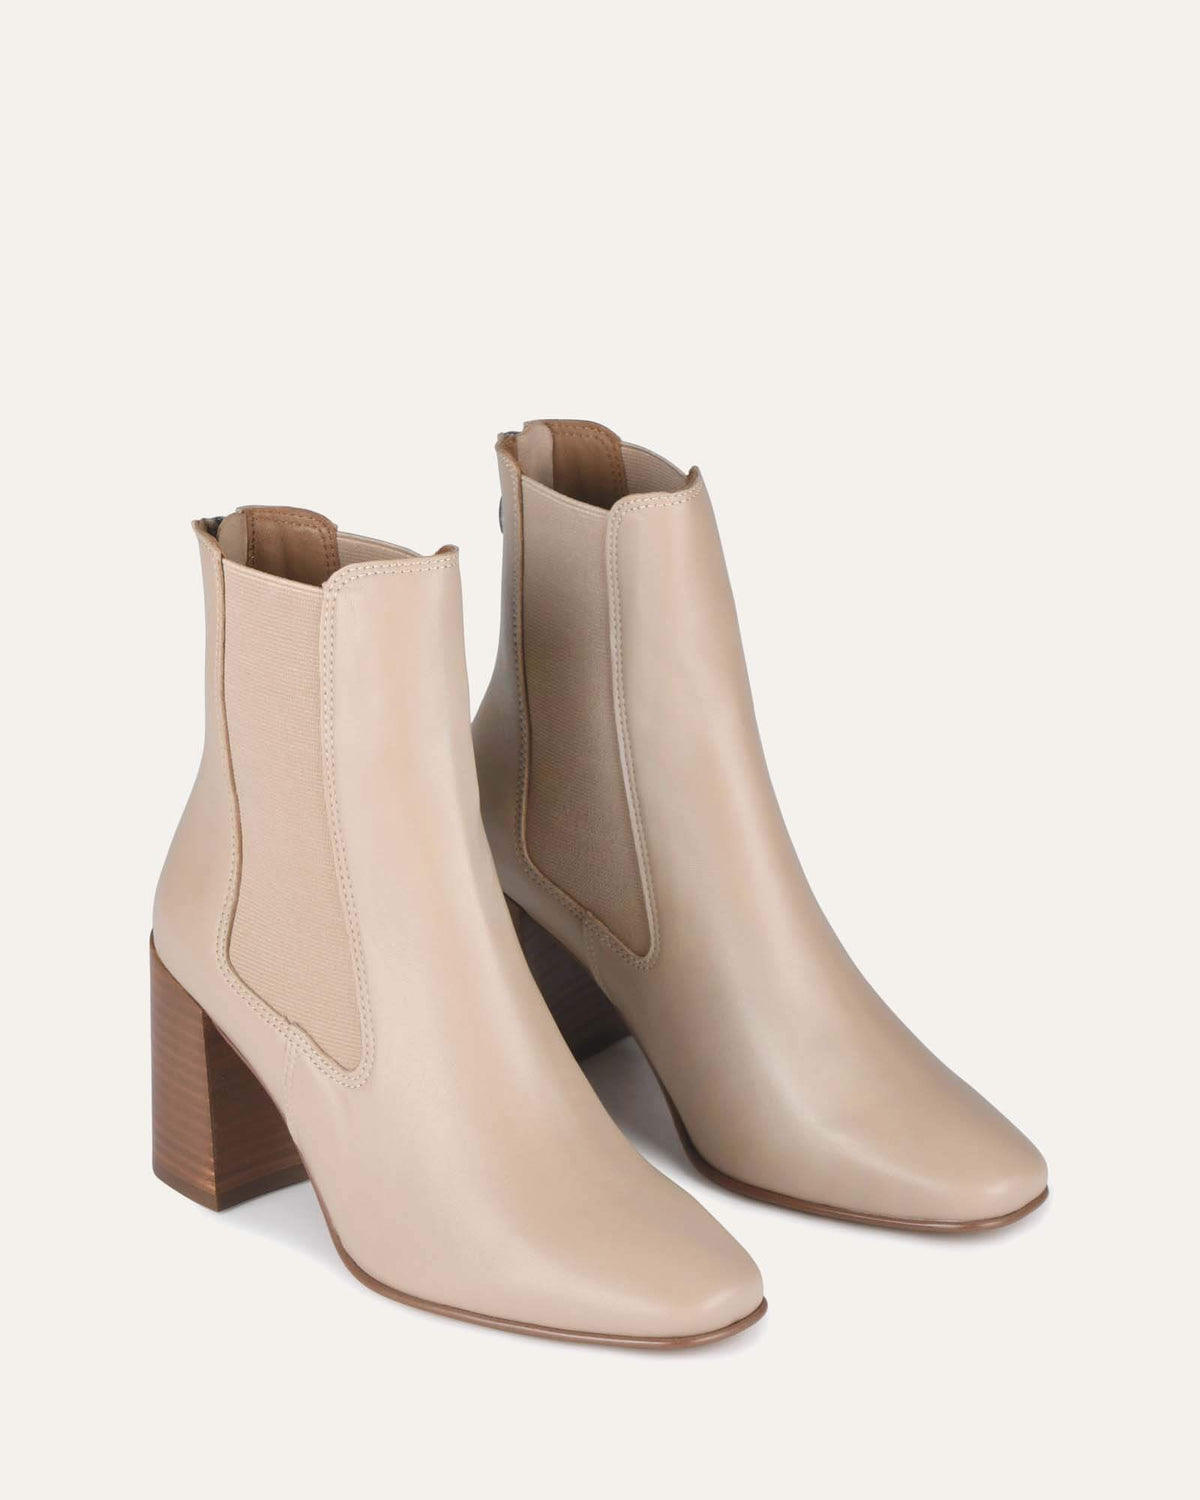 DIAMOND MID ANKLE BOOTS BEIGE LEATHER